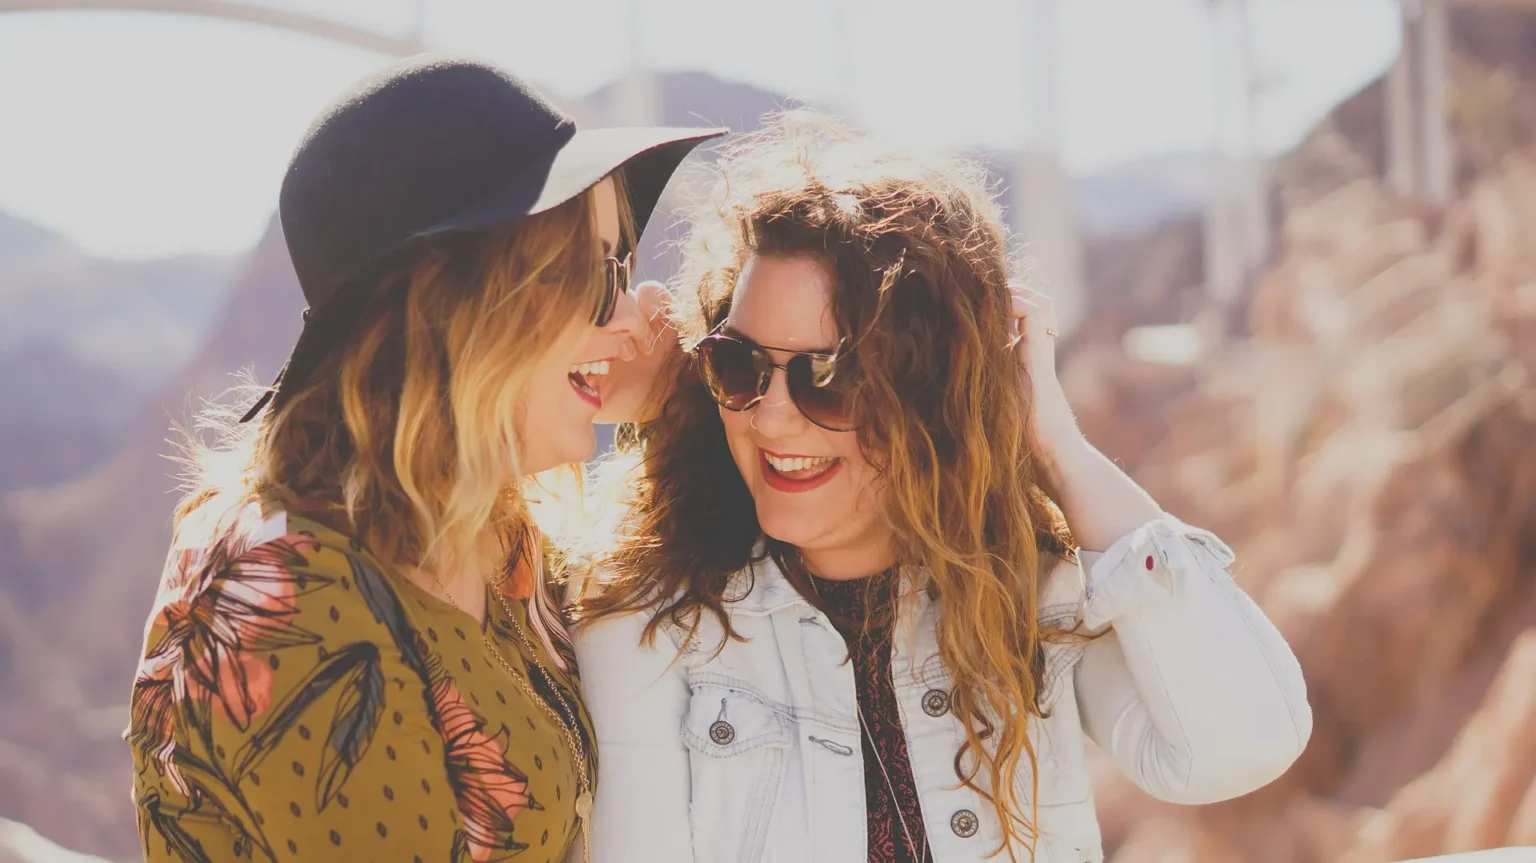 In the picture there are two girls laughing. They are outside and they are wearing sunglasses and, one of them, a large black hat.